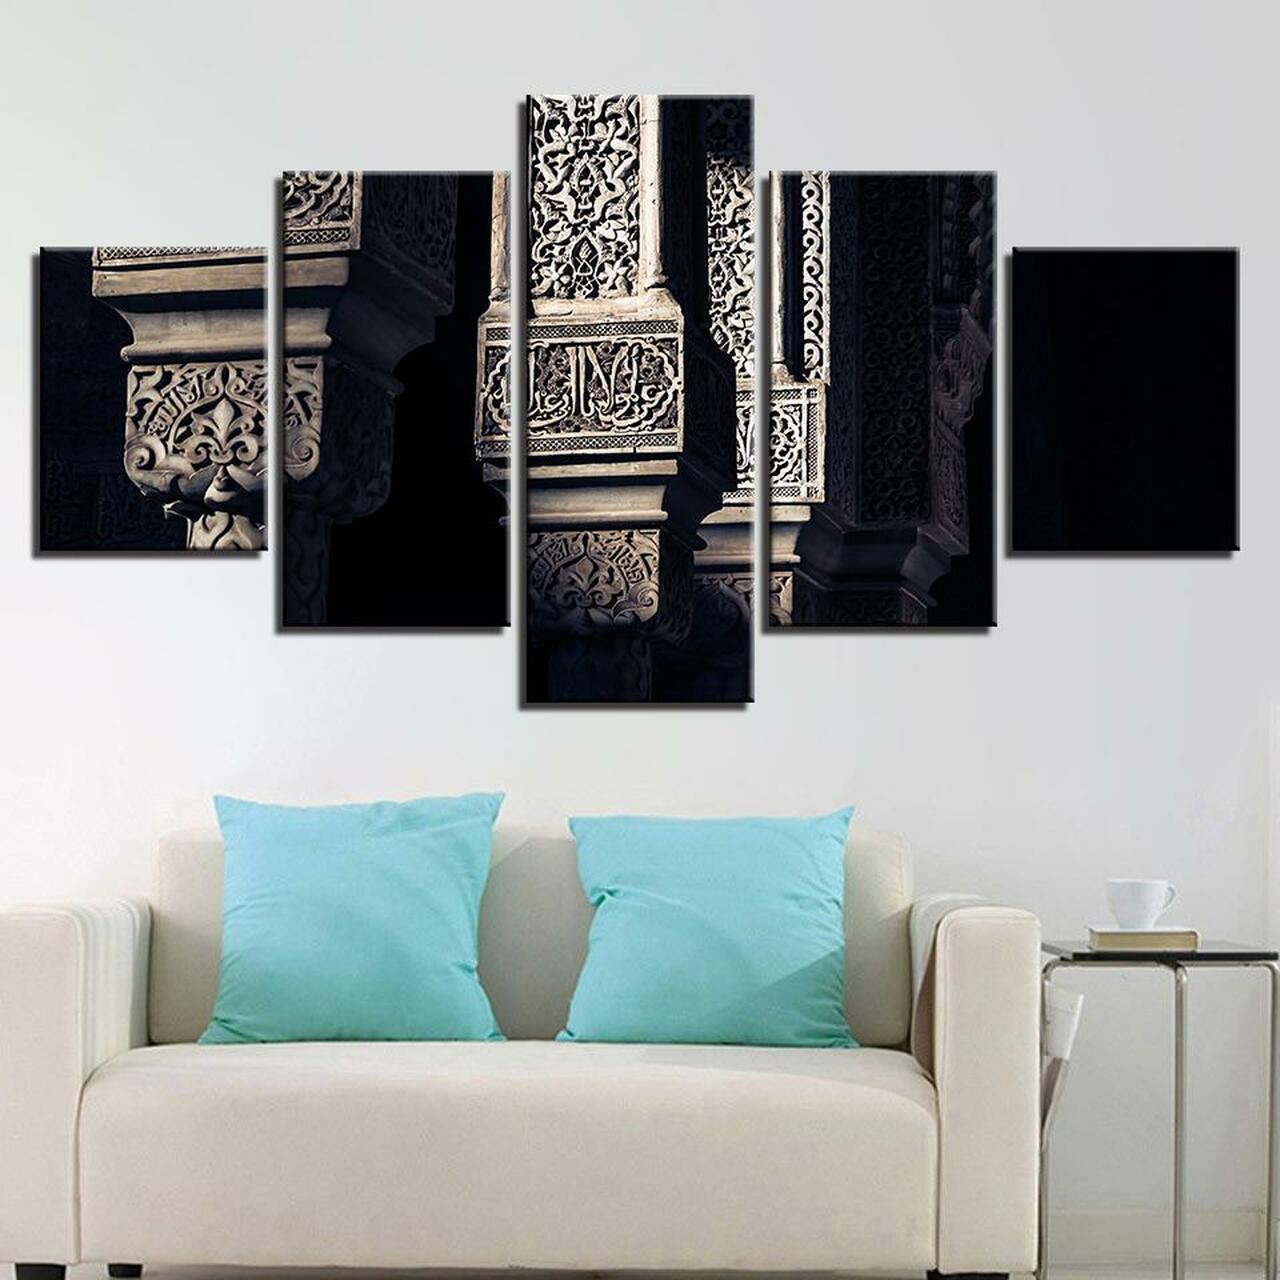 CARVINGS IN MOSQUE 5 Piece Canvas Art Wall Decor